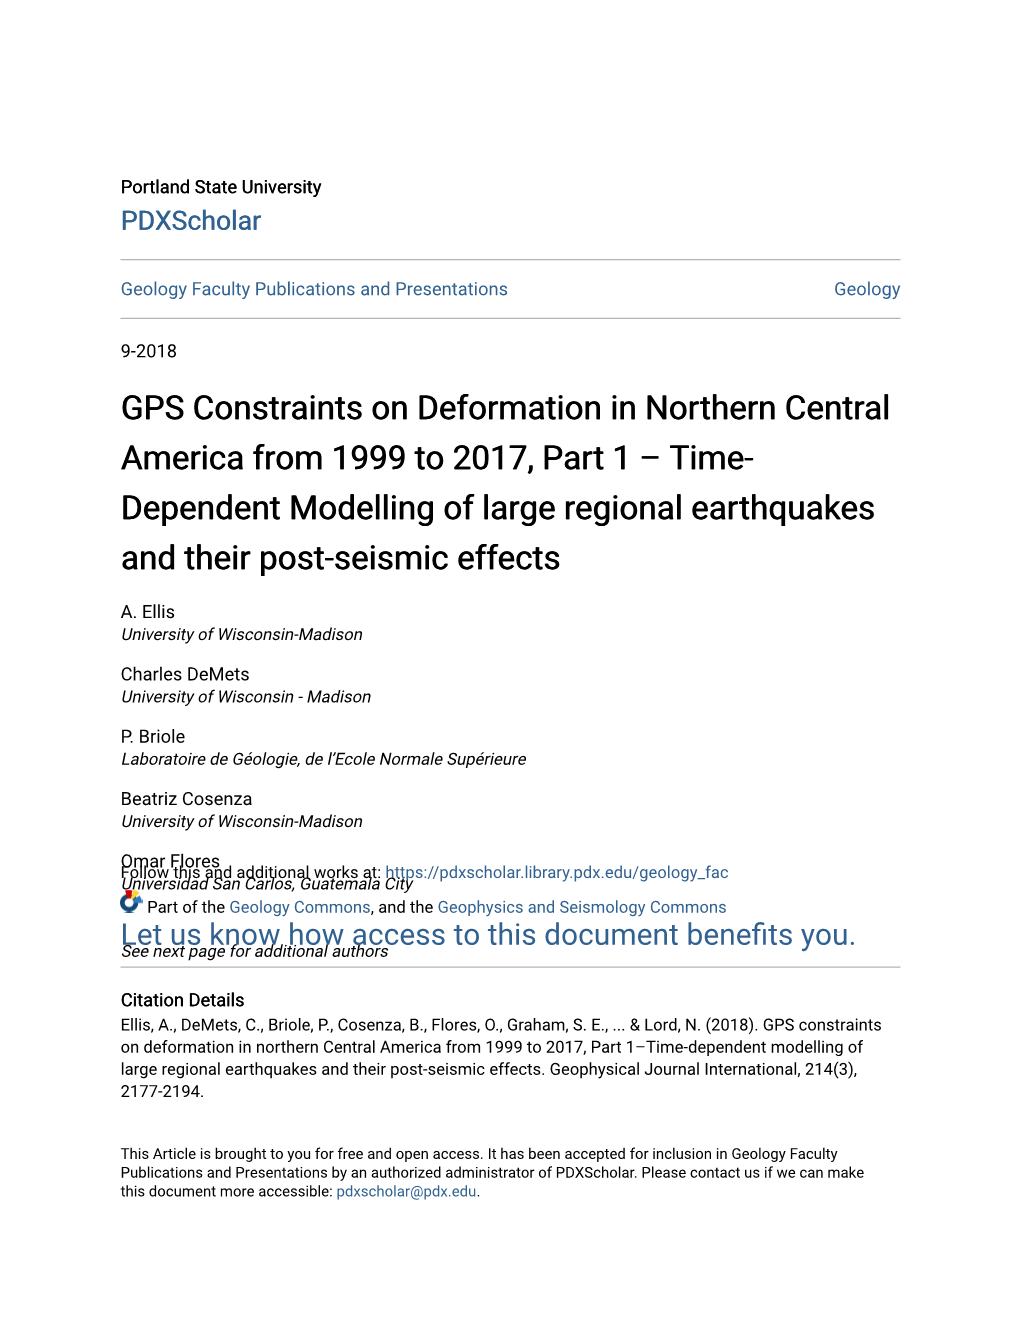 GPS Constraints on Deformation in Northern Central